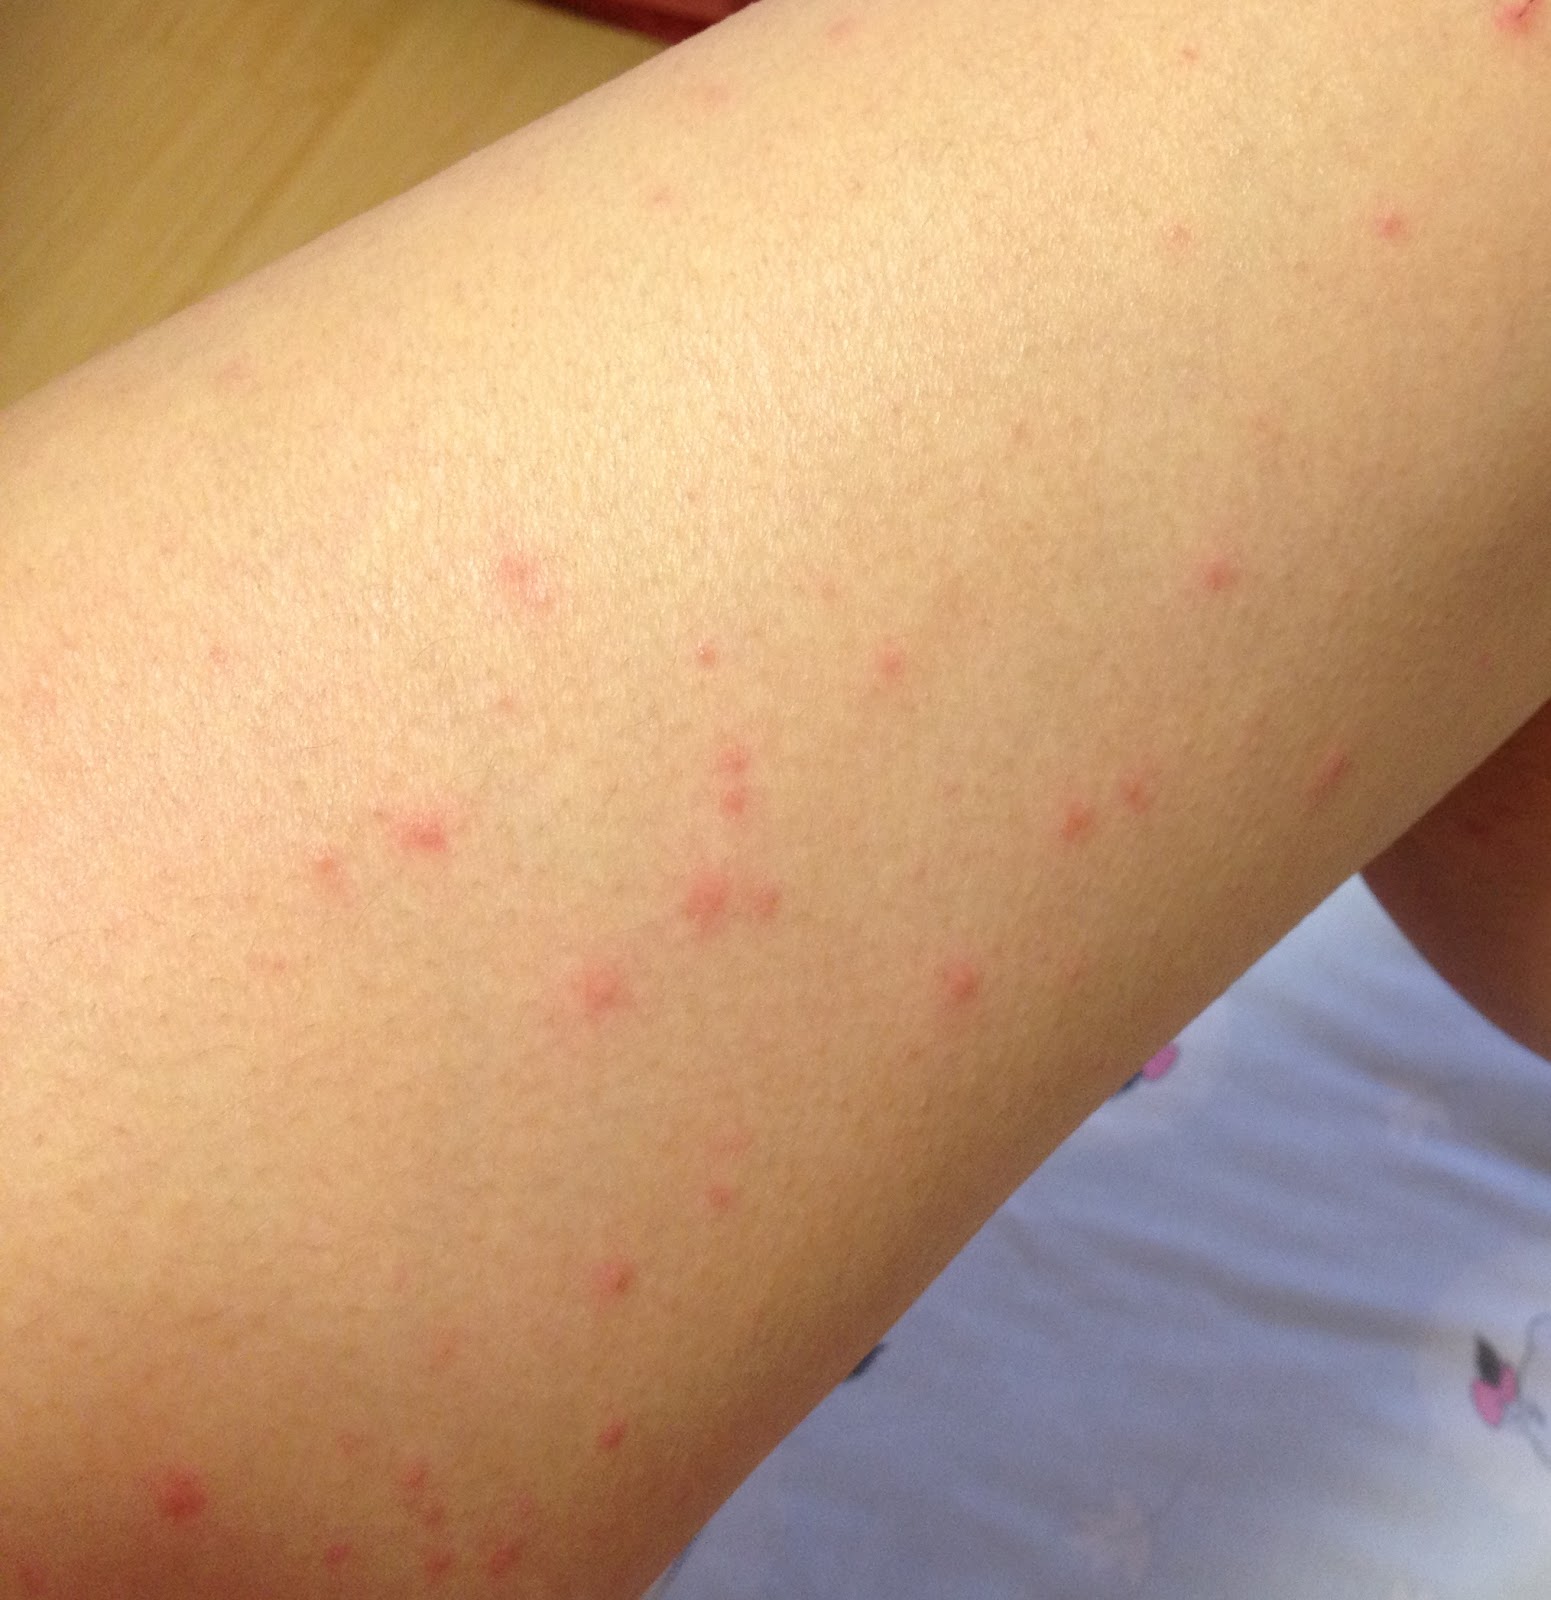 Scabies in toddlers - BabyCenter Canada